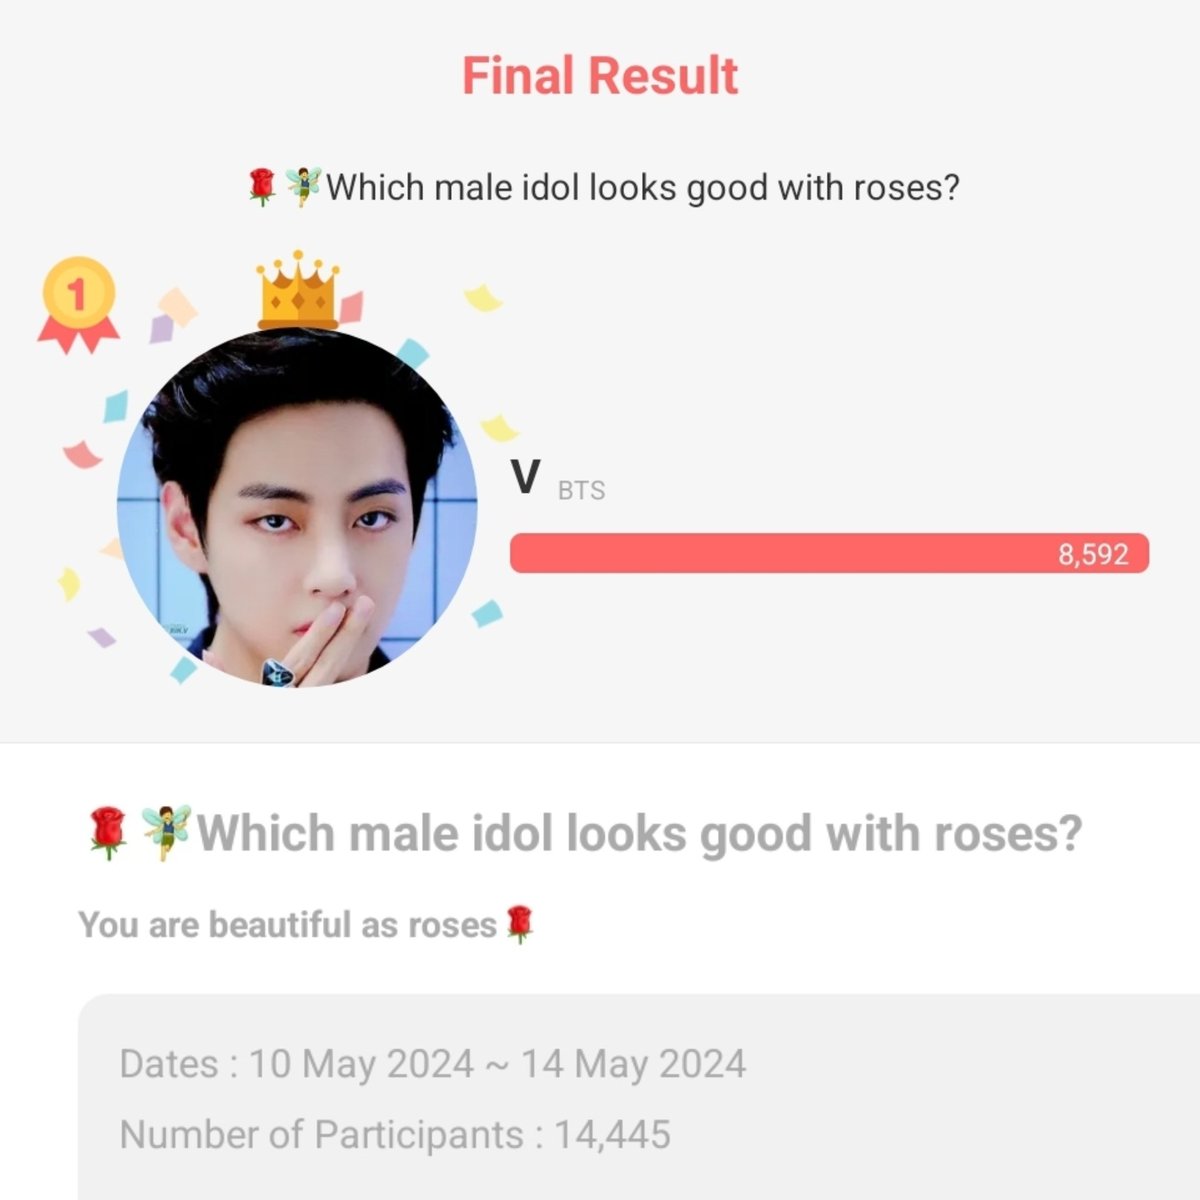 CHOEAEDOL

V was voted #1 in a poll <Which male idol looks good with Roses?> held frm May 10-14.

V received a total of 8,592 (59.48%) votes to claim 1st place.

CONGRATULATIONS TAEHYUNG!
#BTSV #V